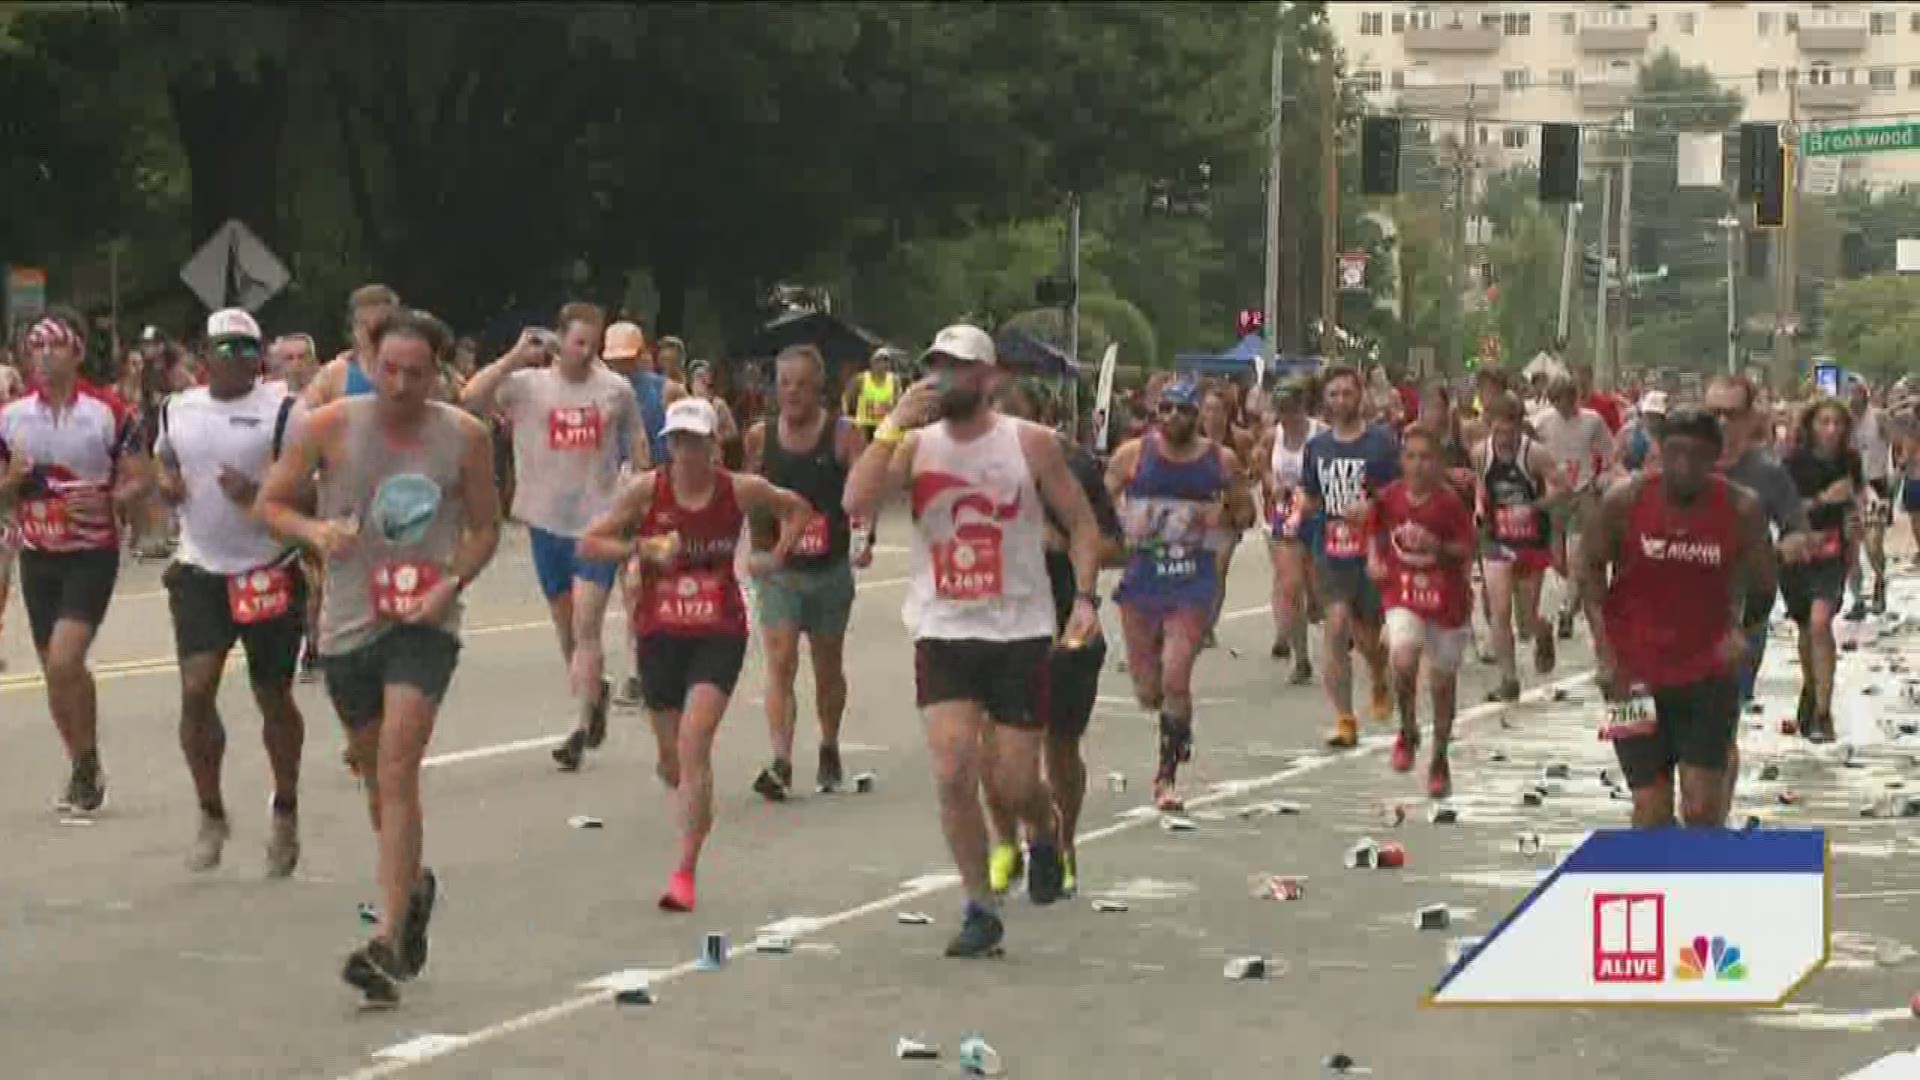 AJC Peachtree Road Race: From start to finish - Part 2